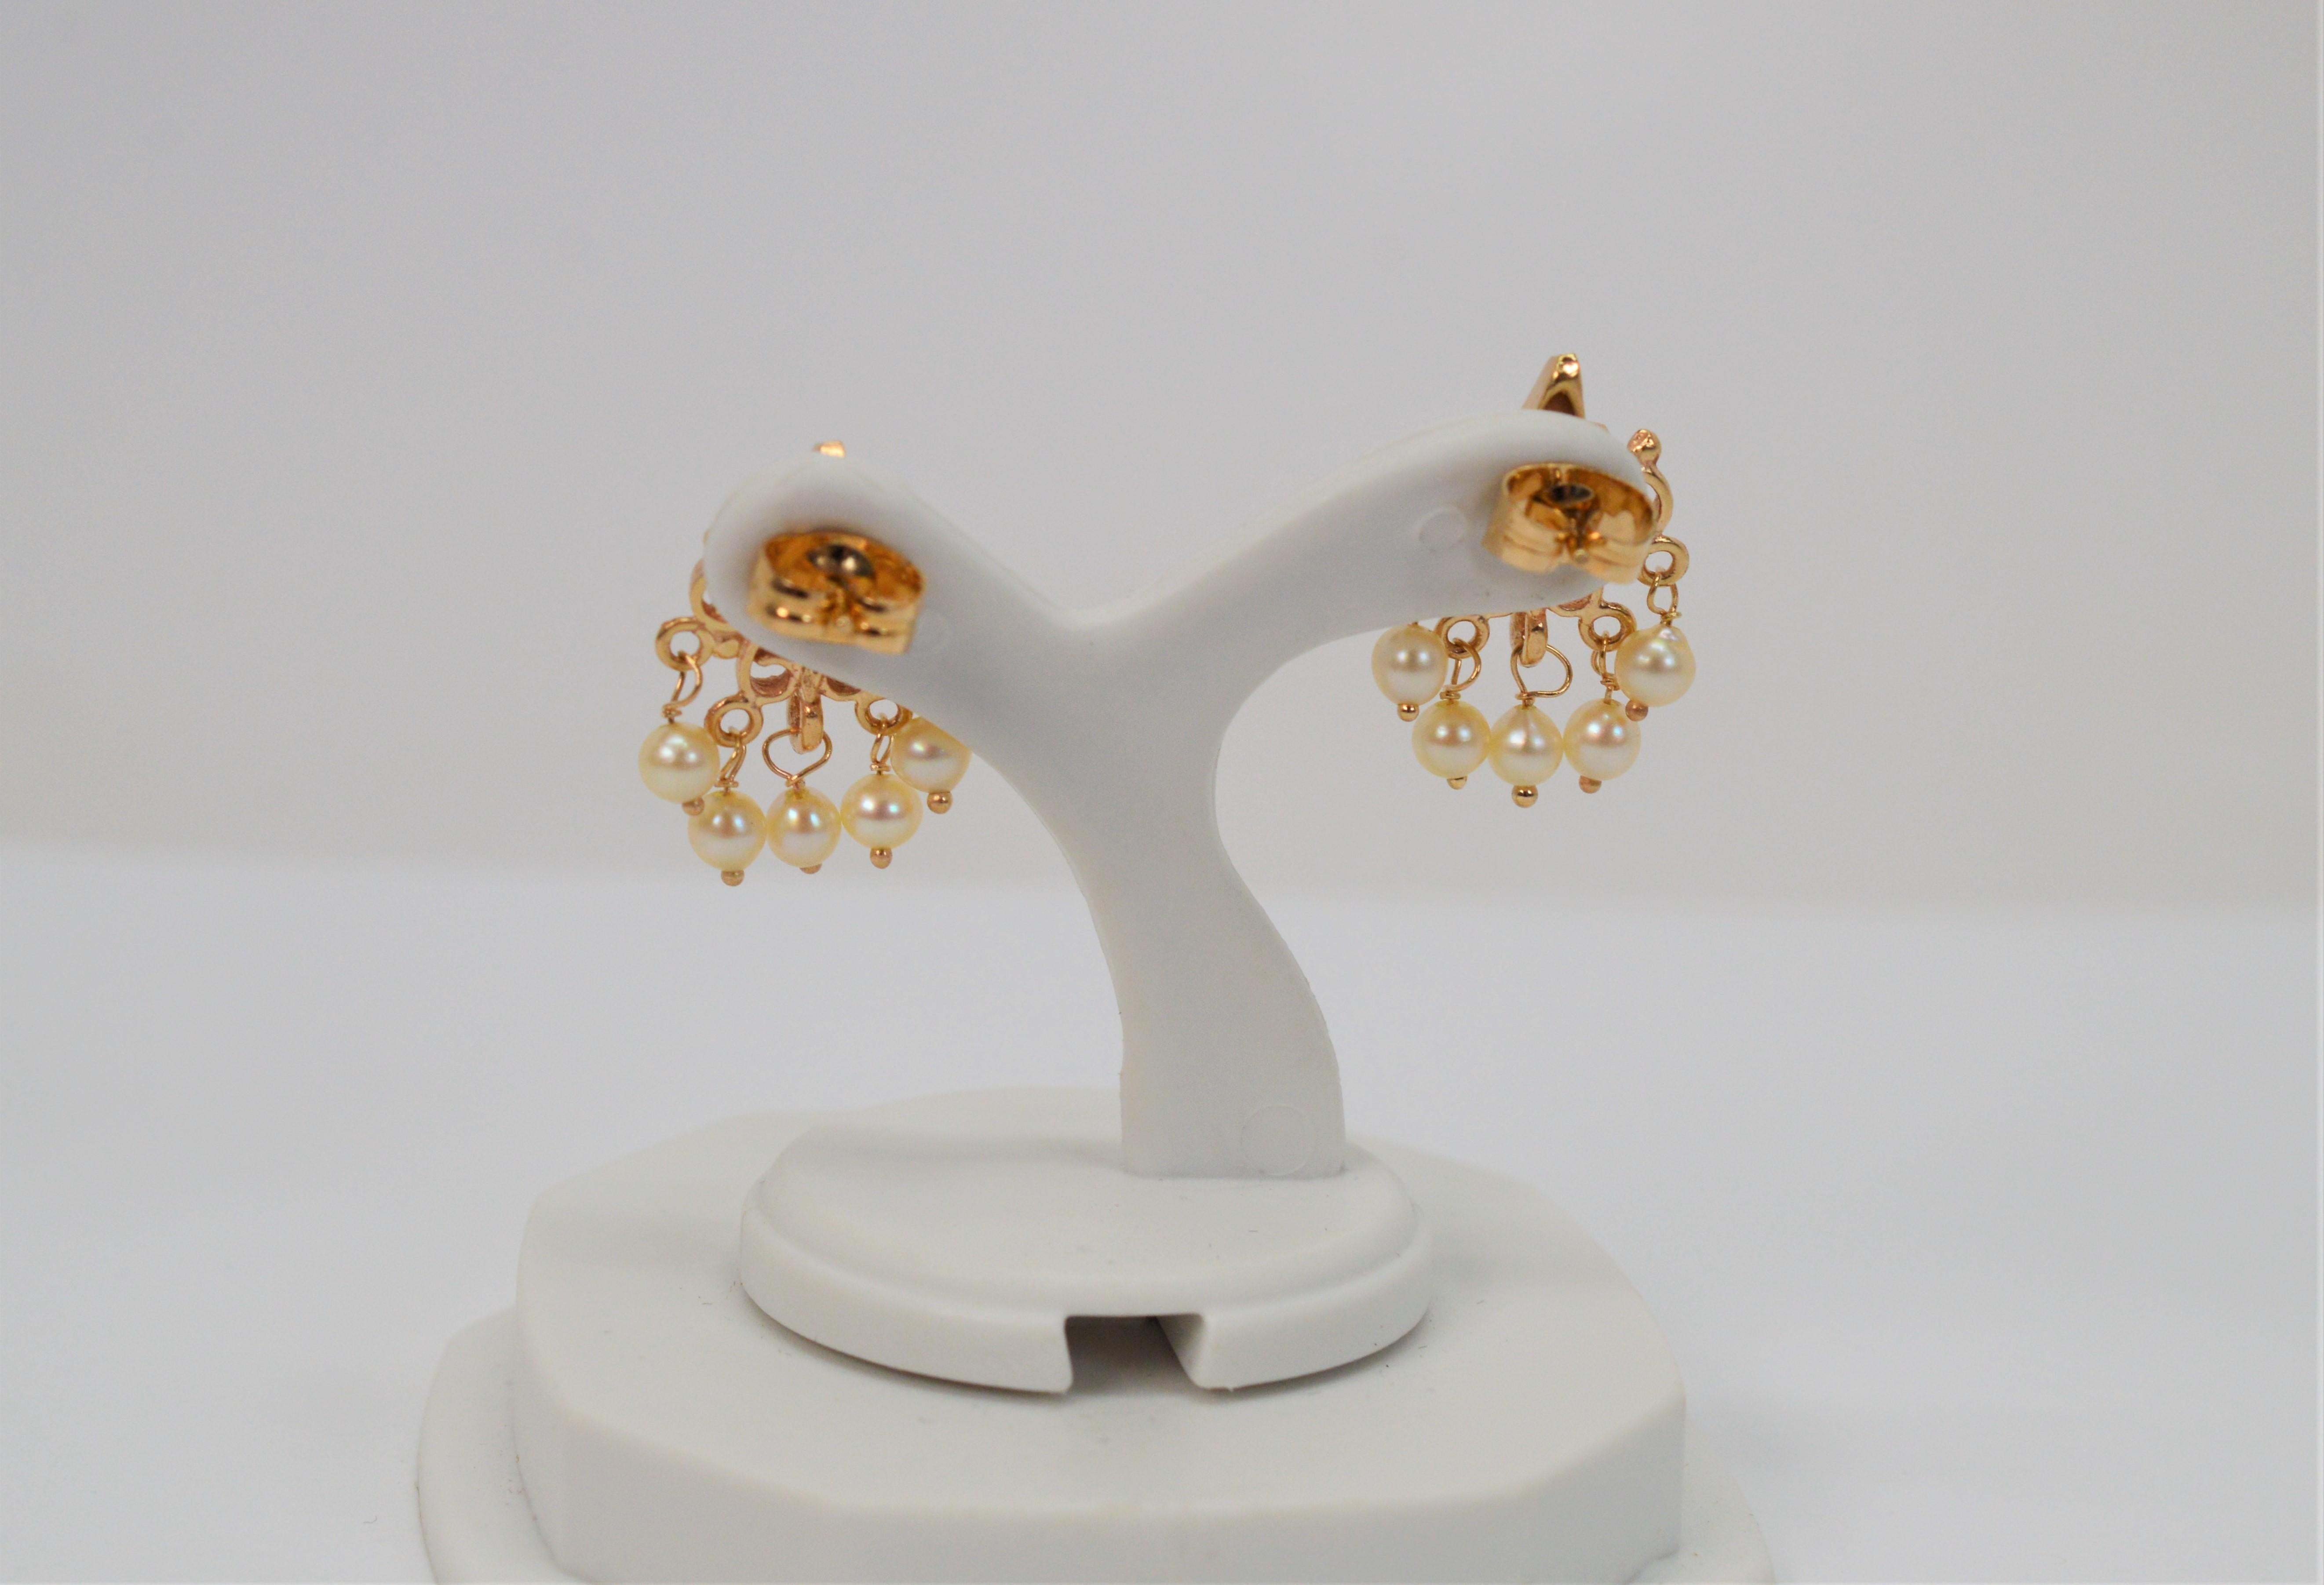 Antique Style 10 Karat Yellow Gold Pearl Drop Earrings with Black Enamel Accents In Good Condition For Sale In Mount Kisco, NY